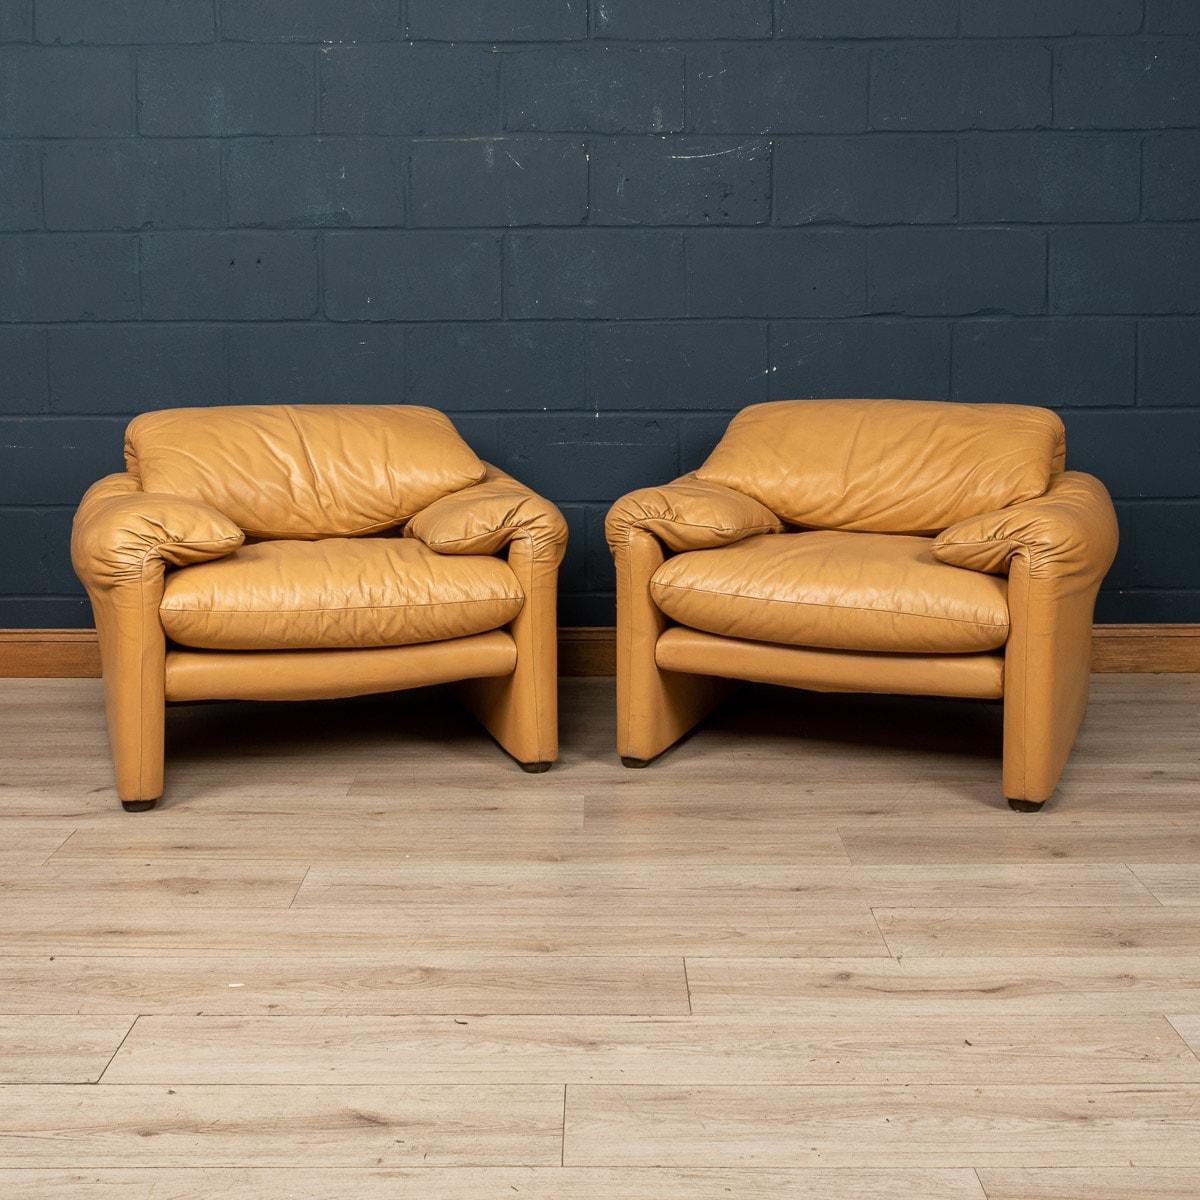 A pair of “675 Maralunga” armchairs in original beige leather upholstery. The Maralunga sofa was designed by Vico Magistretti in the early 1970s for Cassina. Cosy and adaptable, the ever cool sofa was an instant classic. Comfort comes in 2 forms